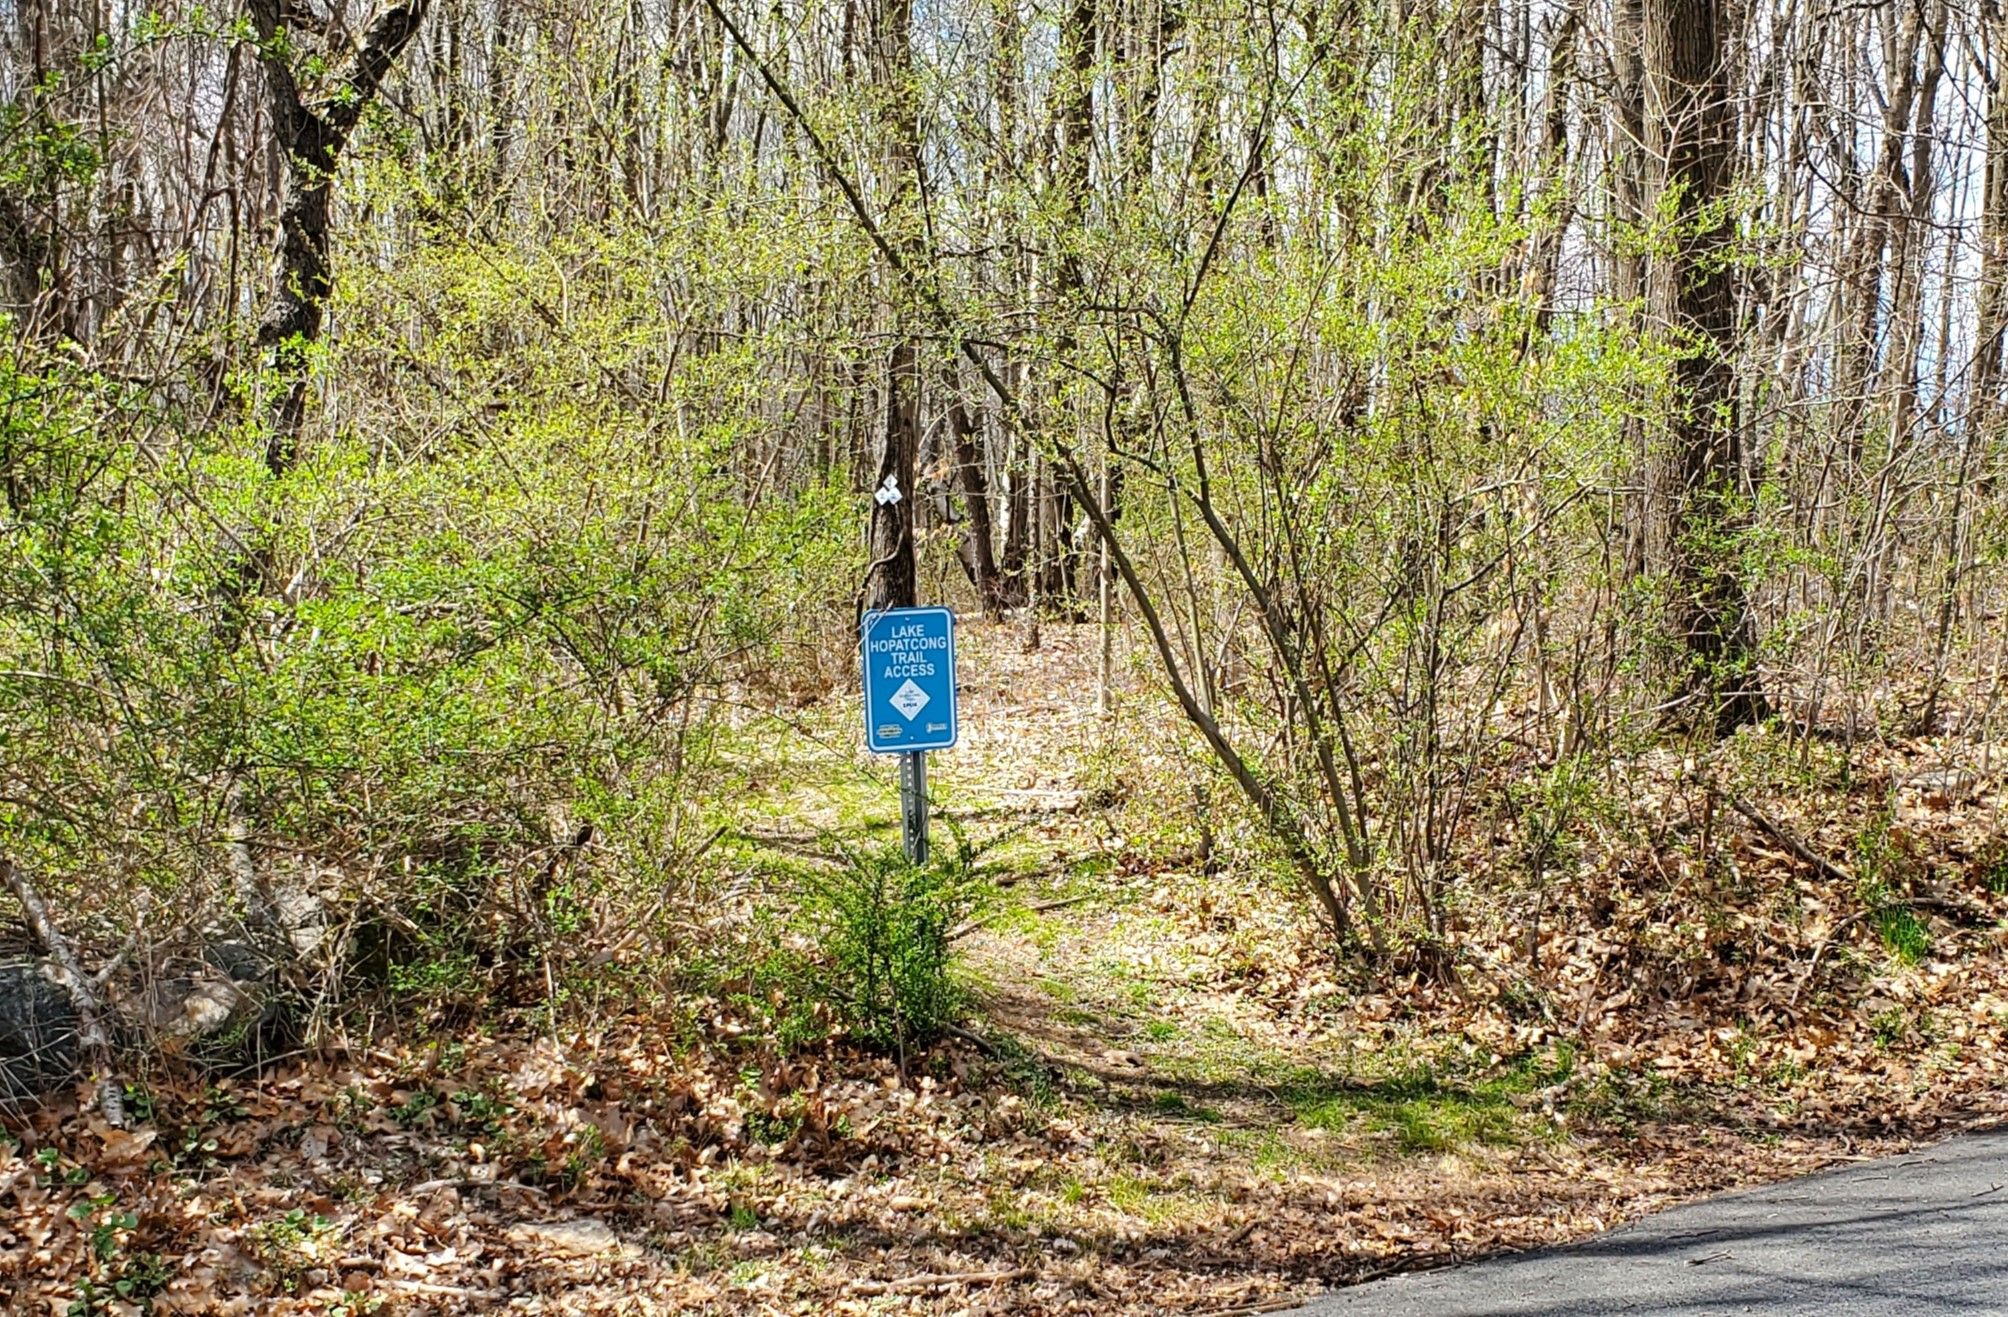 Trail head signed at Hopatcong Senior Center